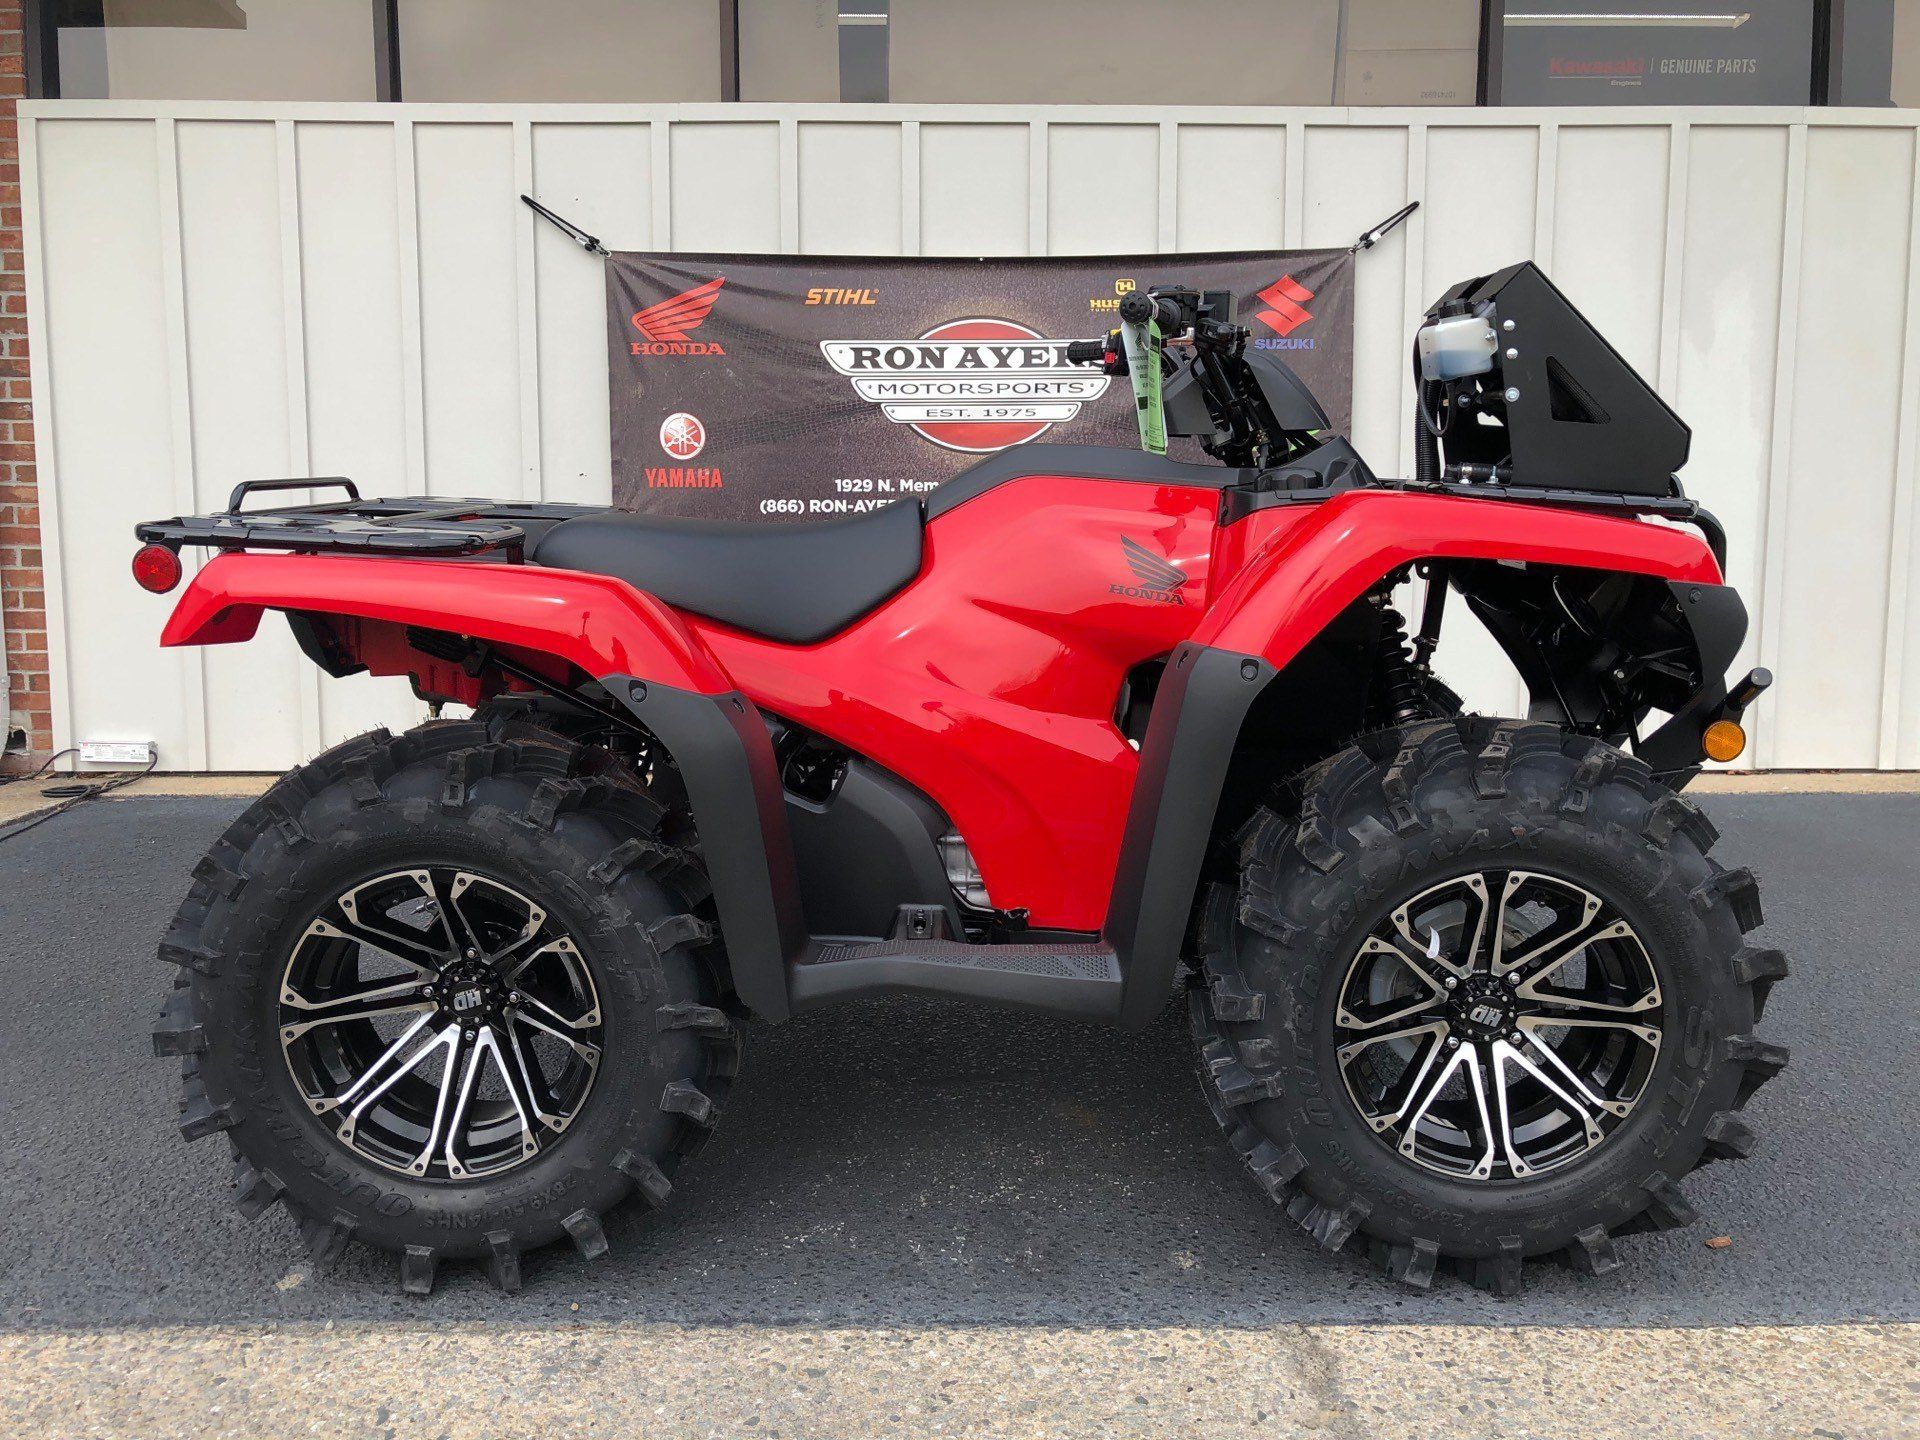 New 2020 Honda FourTrax Rancher 4x4 ATVs In Greenville, NC. Stock Number: N A